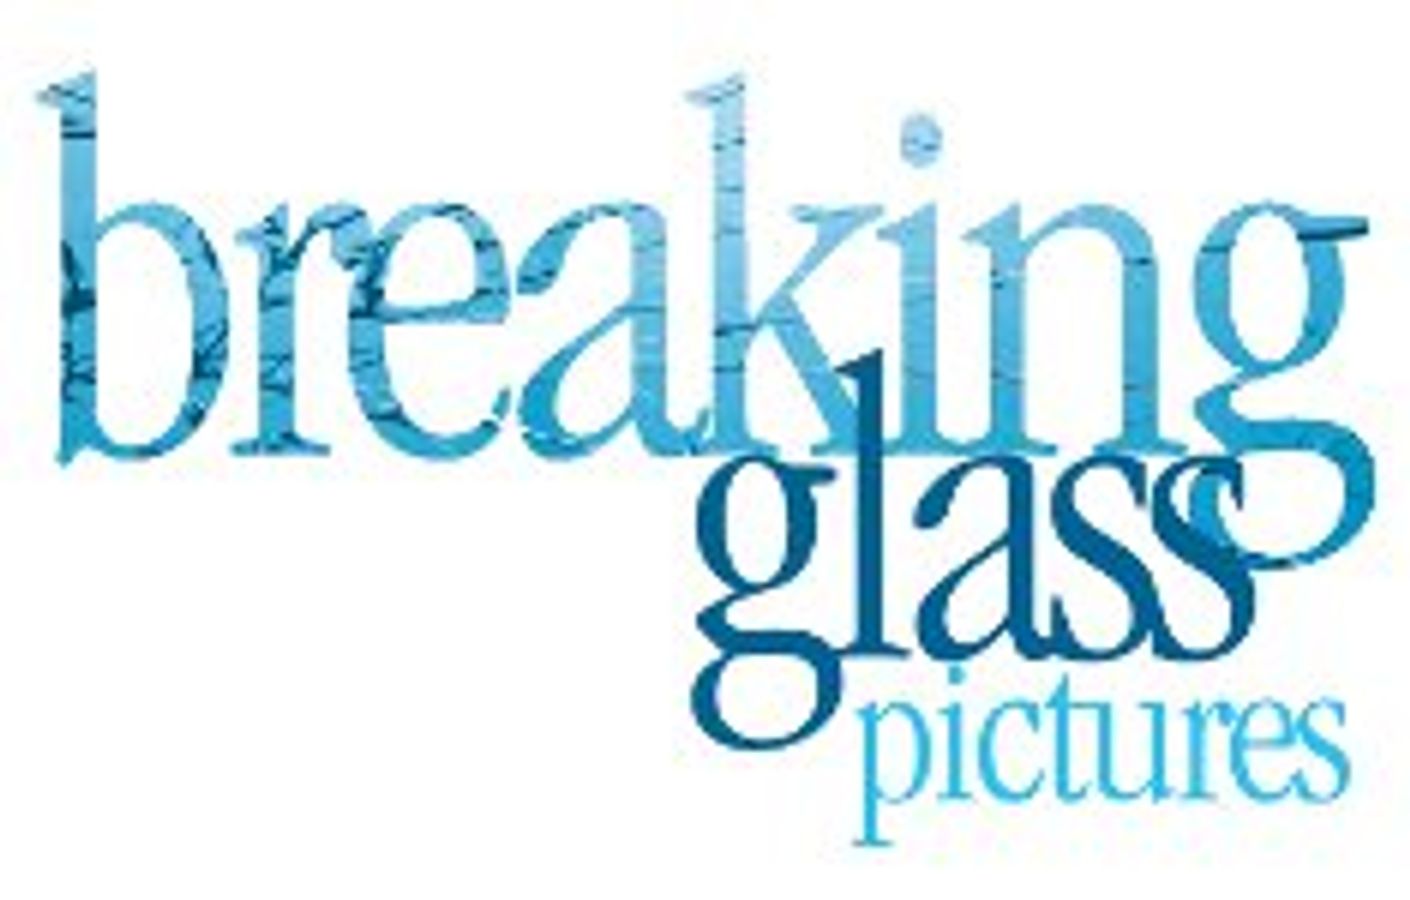 Breaking Glass Pictures